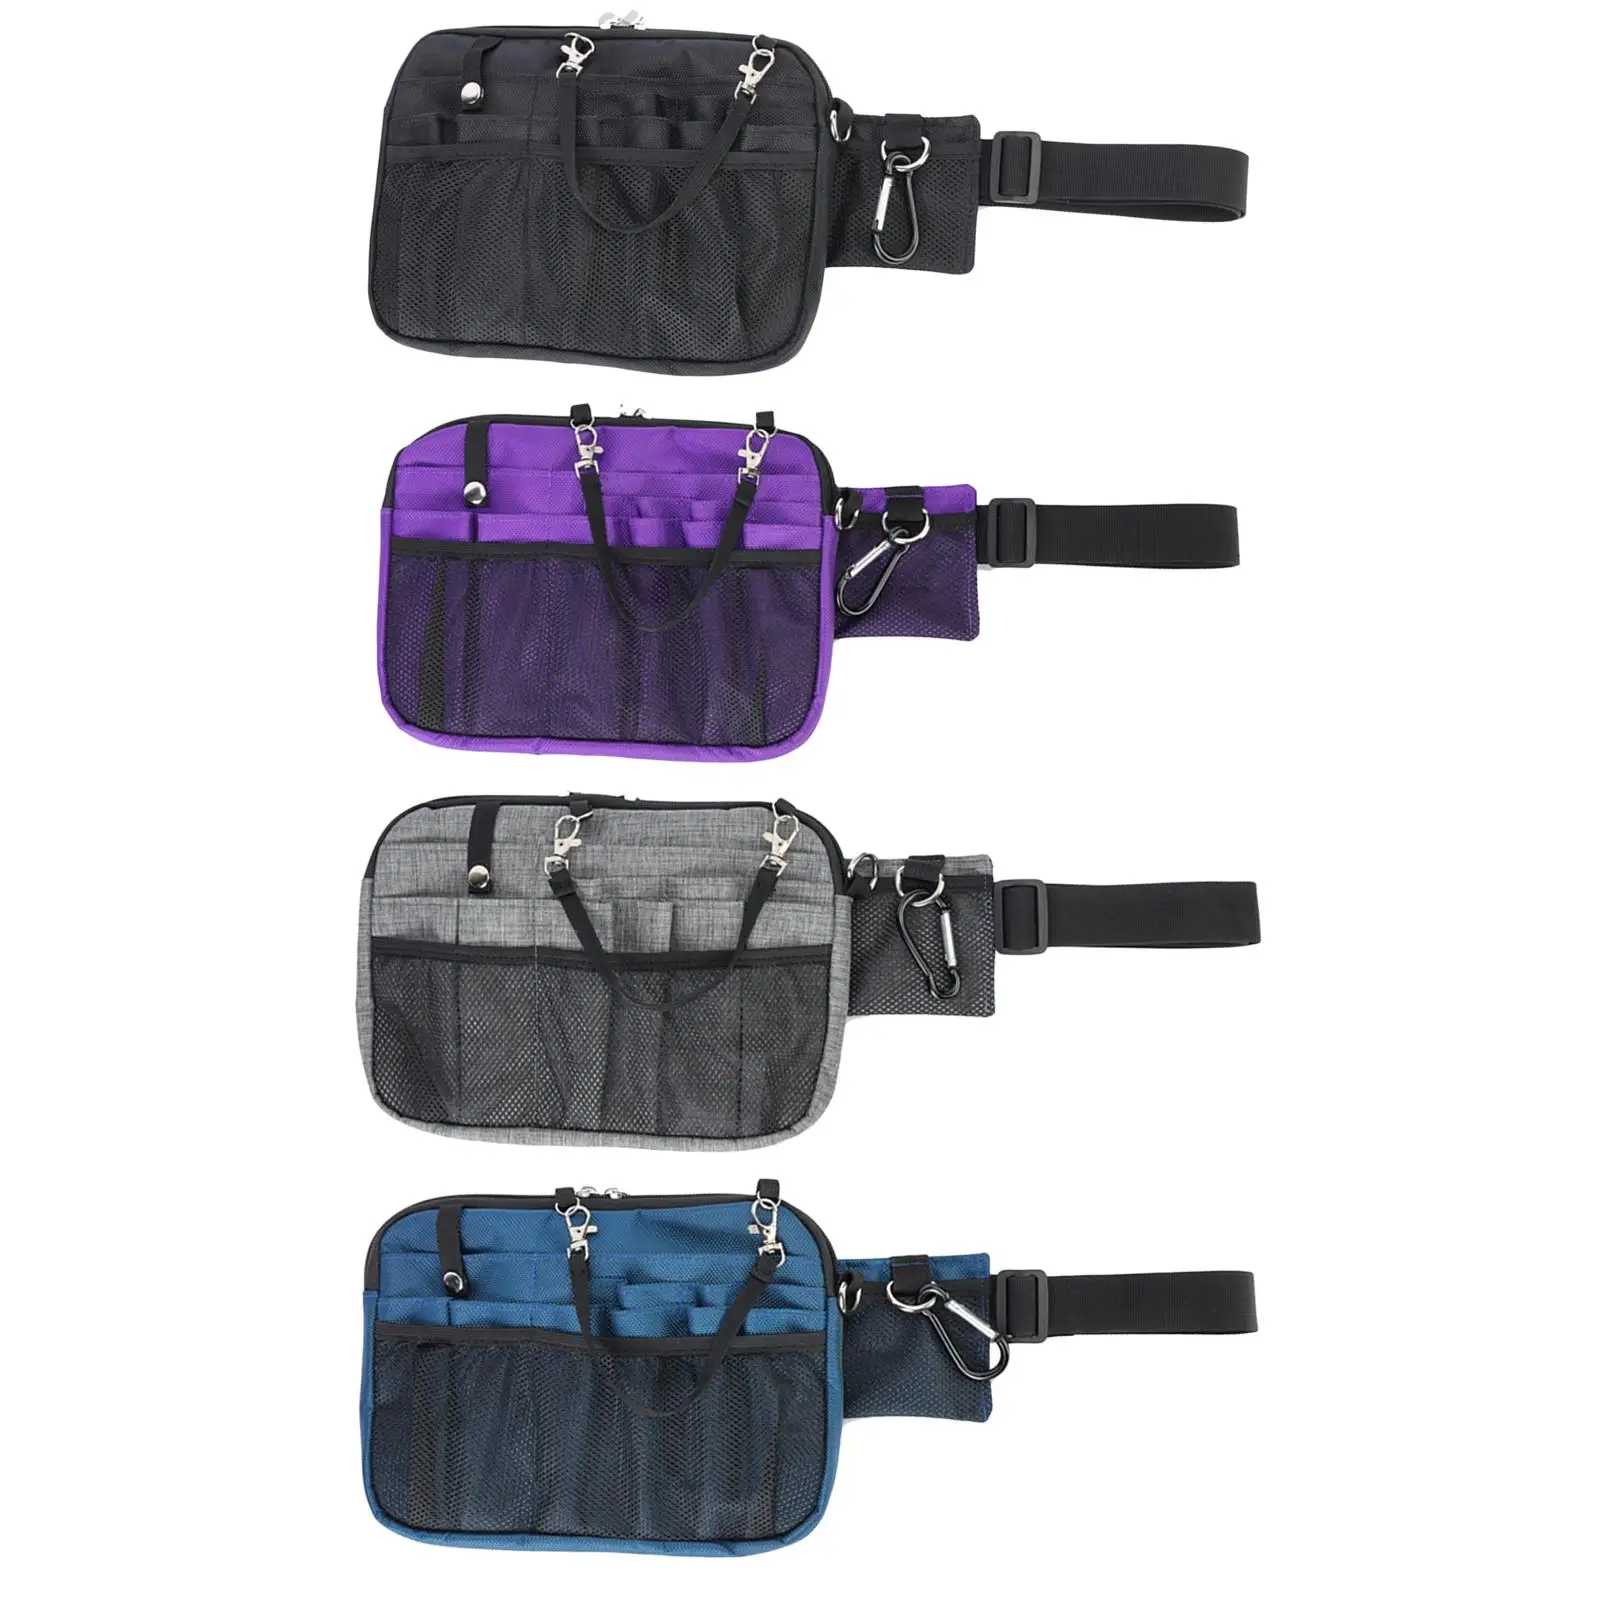 Nurse Fanny Pack Multi Compartments Nurse Tool Belt with Tape Holder Pouch